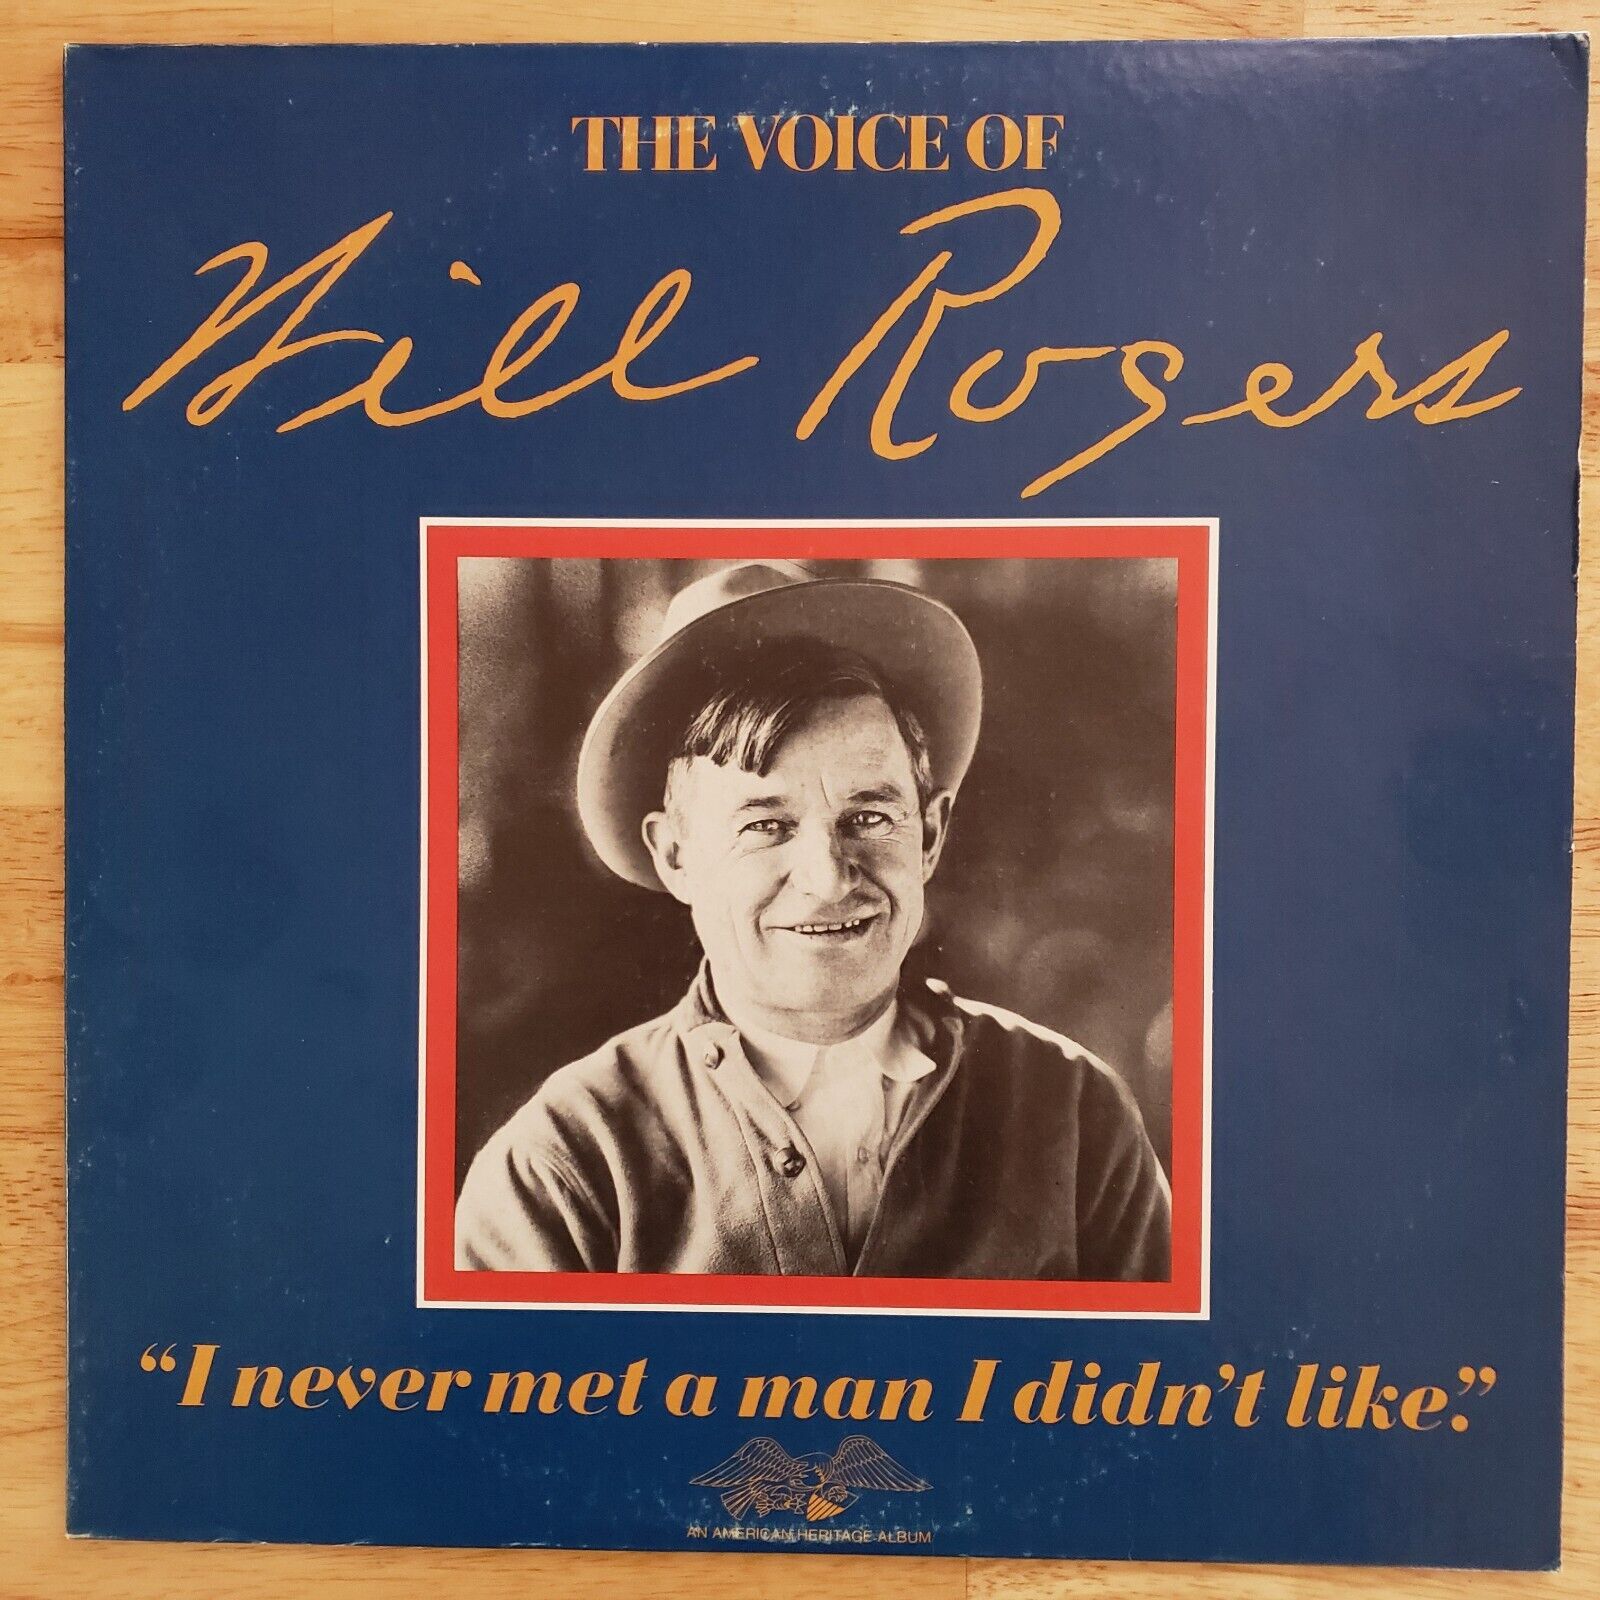 Will Rogers – The Voice of Will Rogers - Vinyl LP 1 American Heritage P 11794 NM